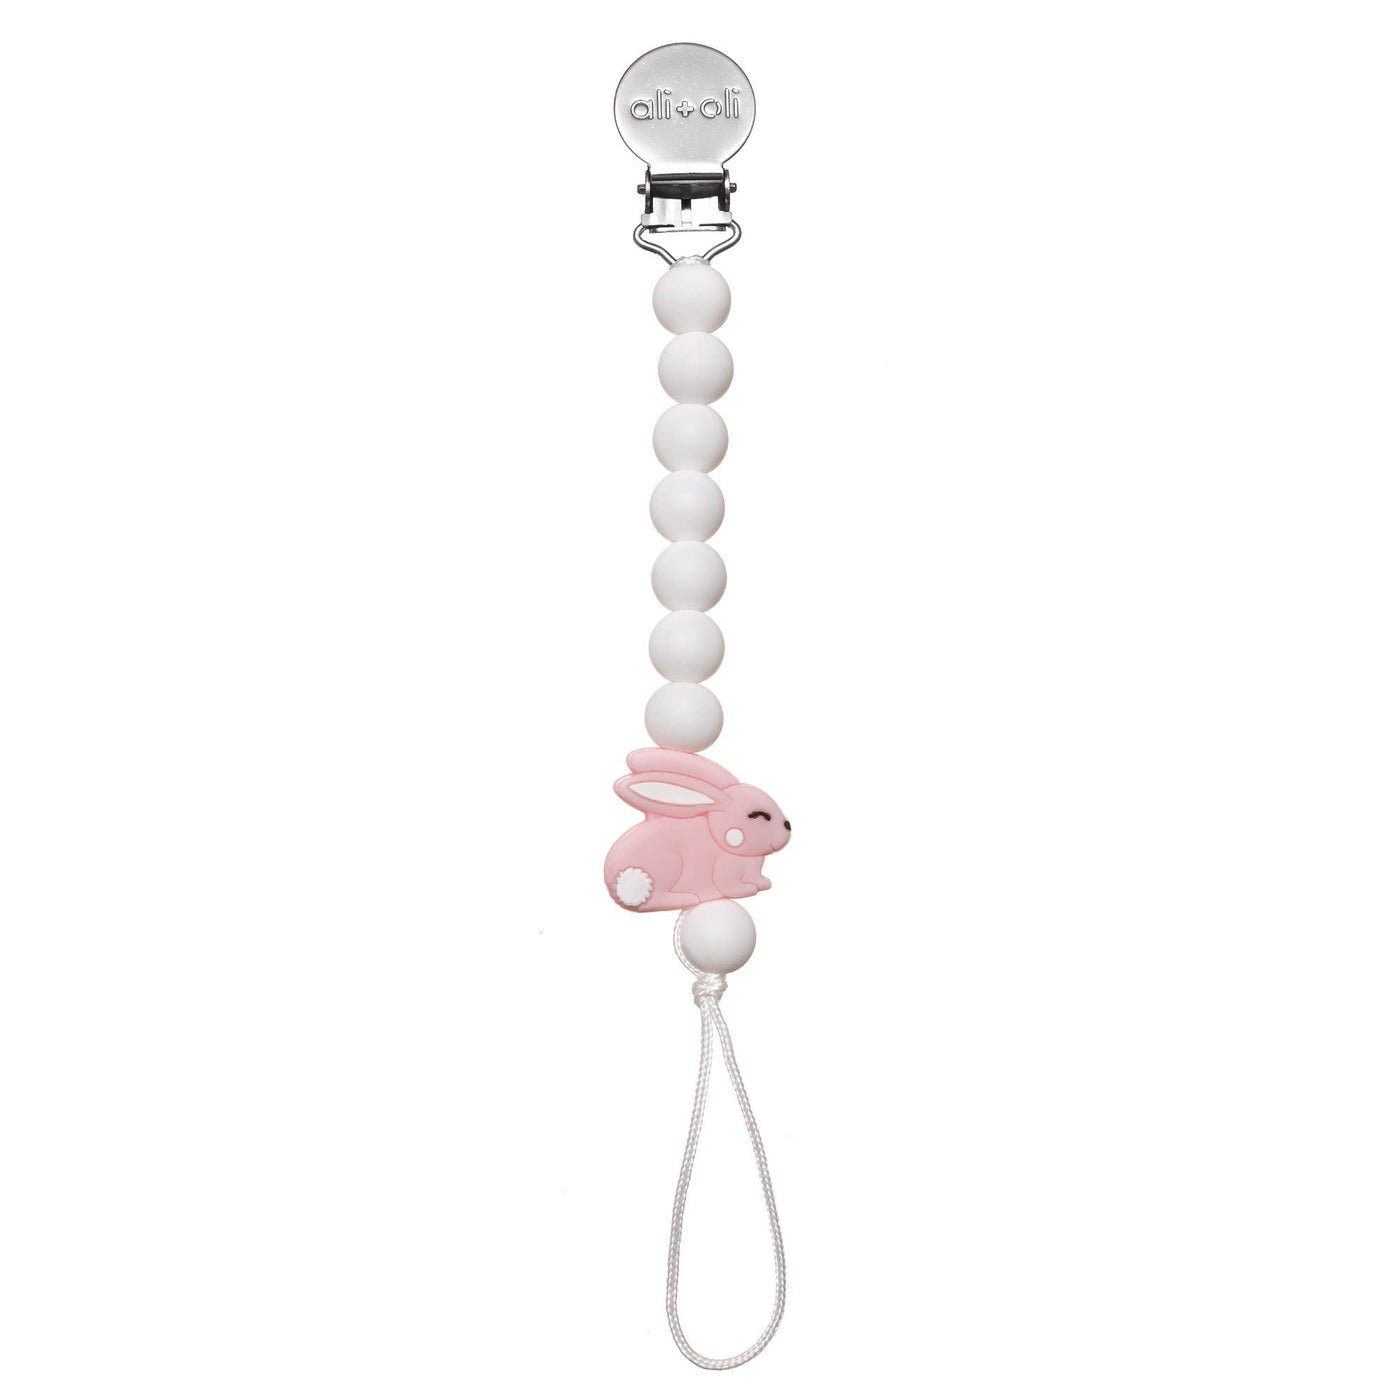 Ali+Oli - Pacifier Clip Limited Edition (See other options) Bunny